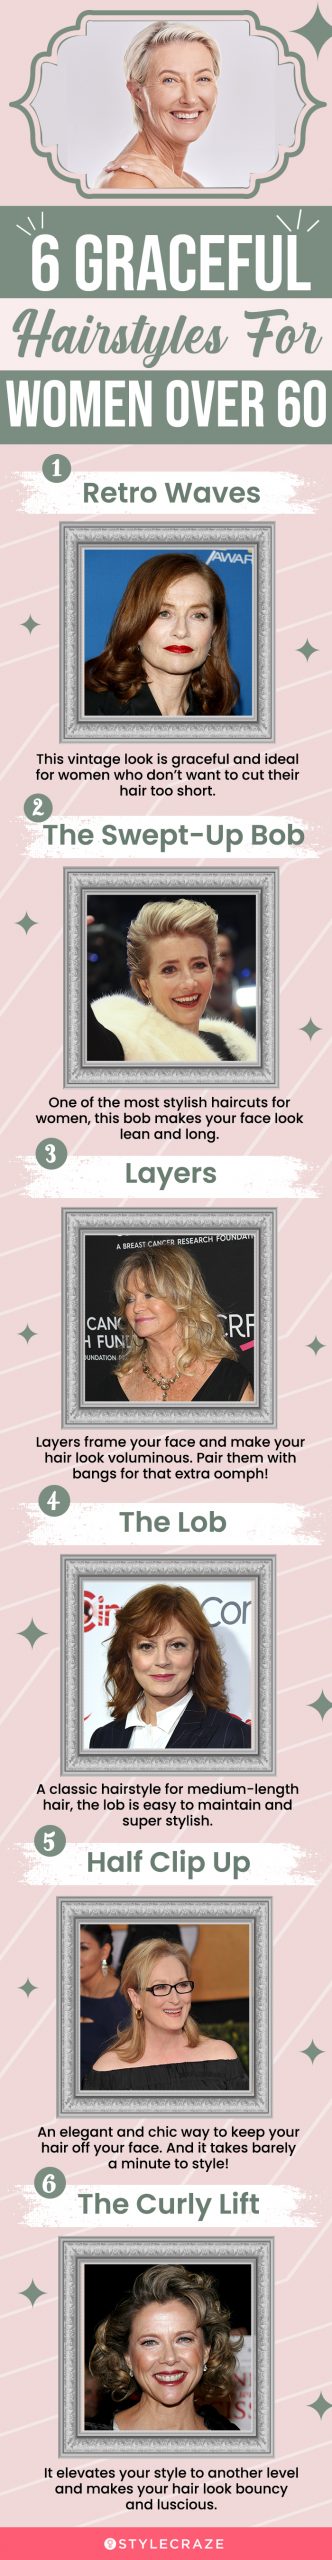 6 graceful hairstyles for women over 60 (infographic)